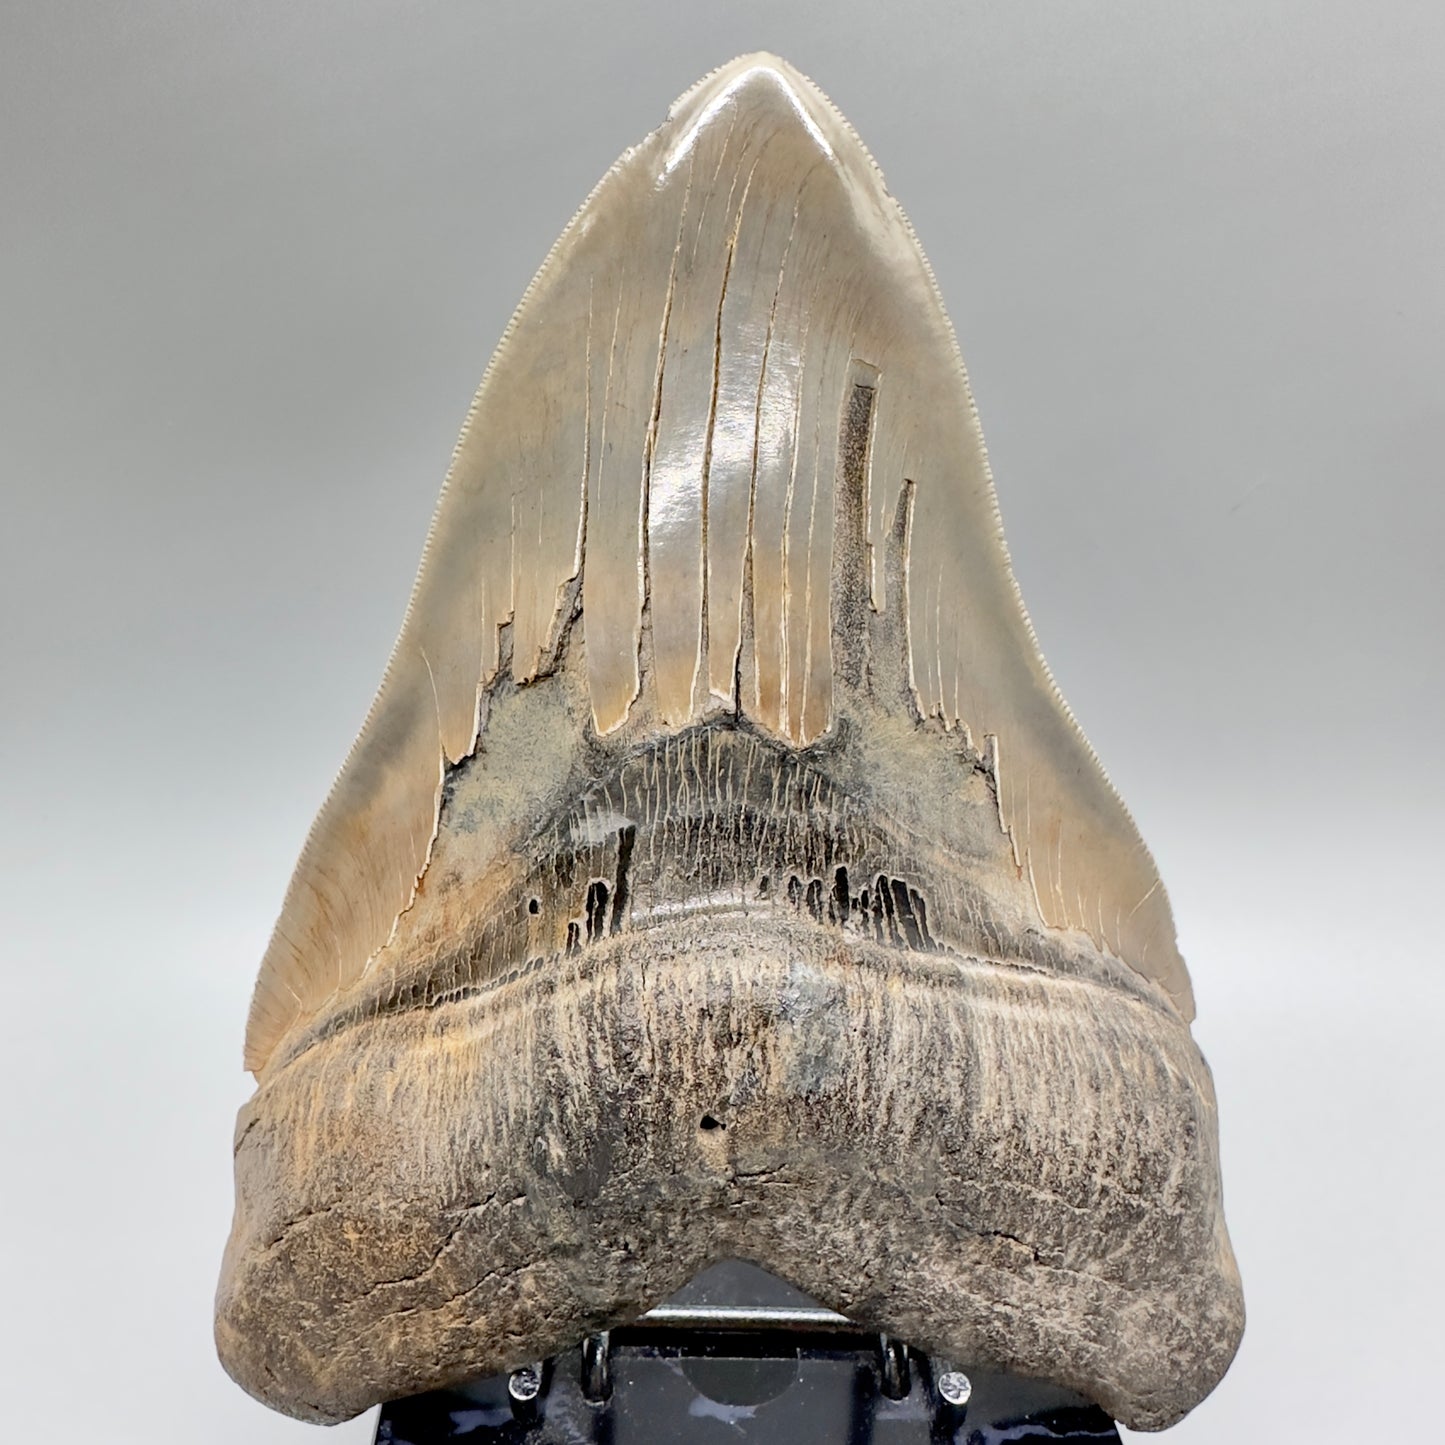 Massive 6.79" Fossil Monster Megalodon Tooth: A Stunning Specimen Close to Maximum Size of 7"